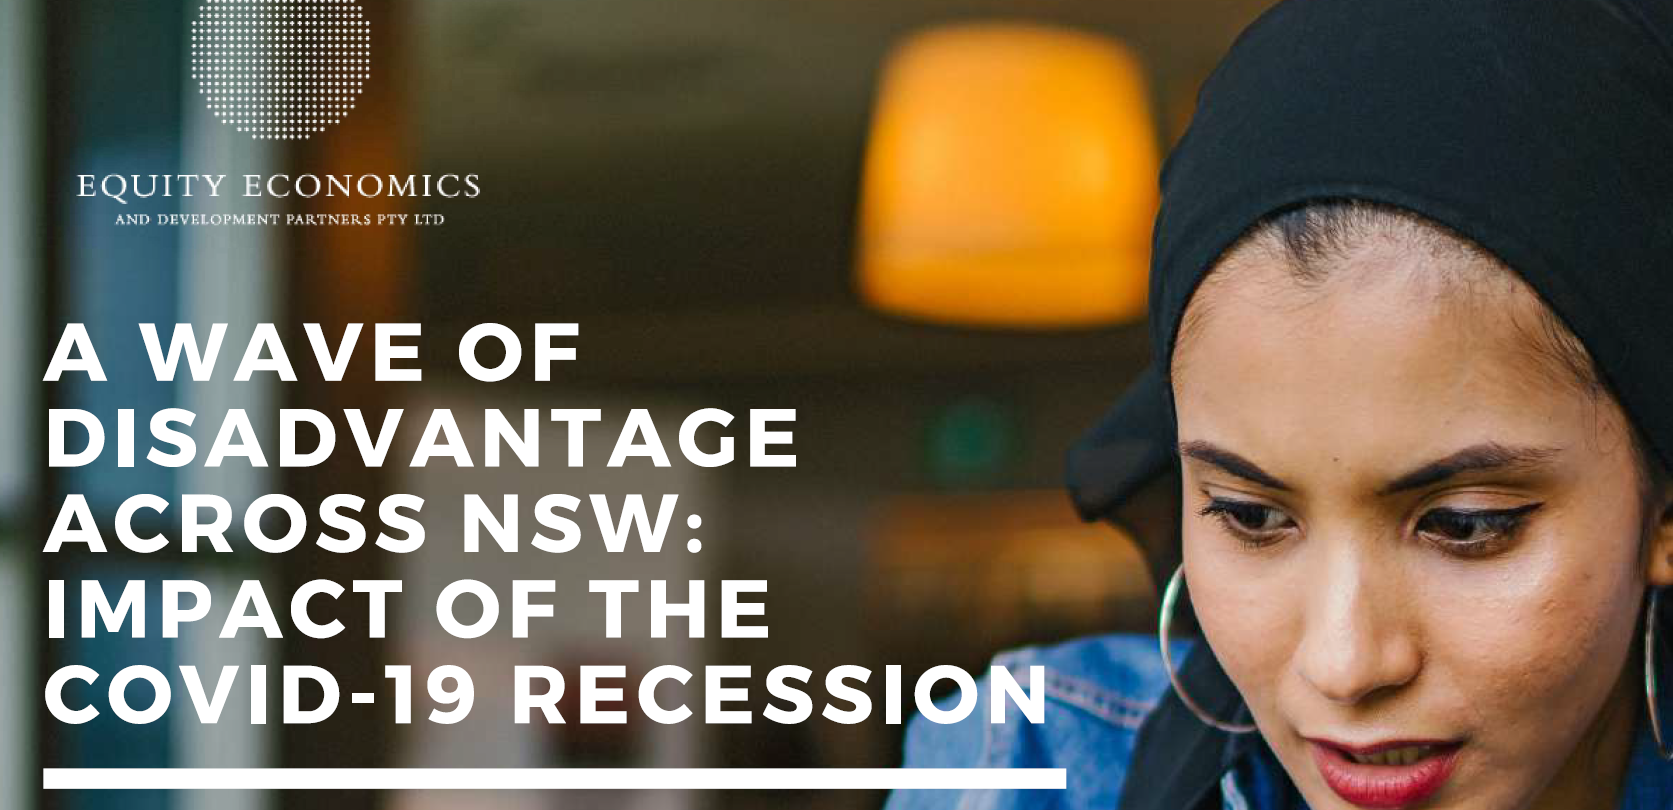 A wave of disadvantage across NSW: The impact of COVID-19